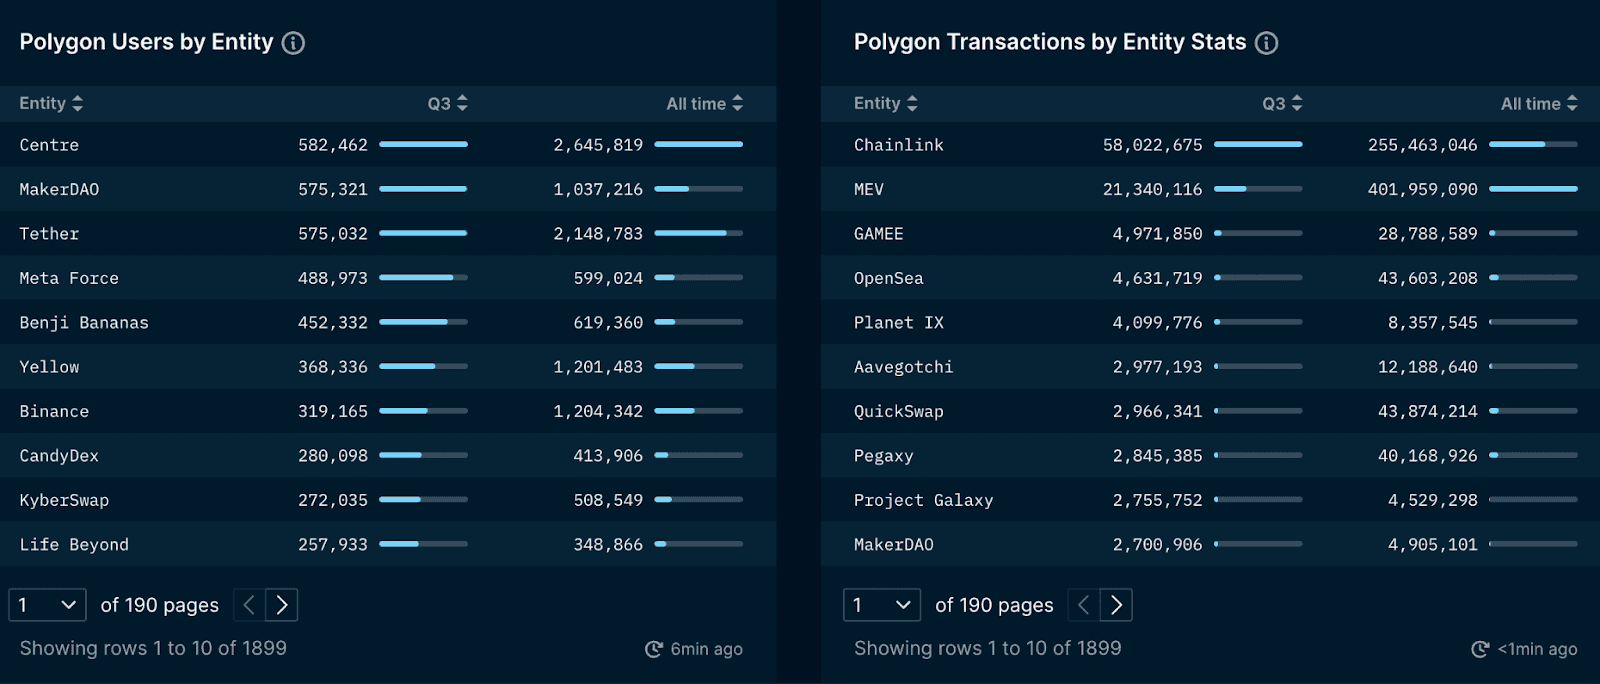 Top Entities by Users and Transactions (excluding unlabelled transactions)